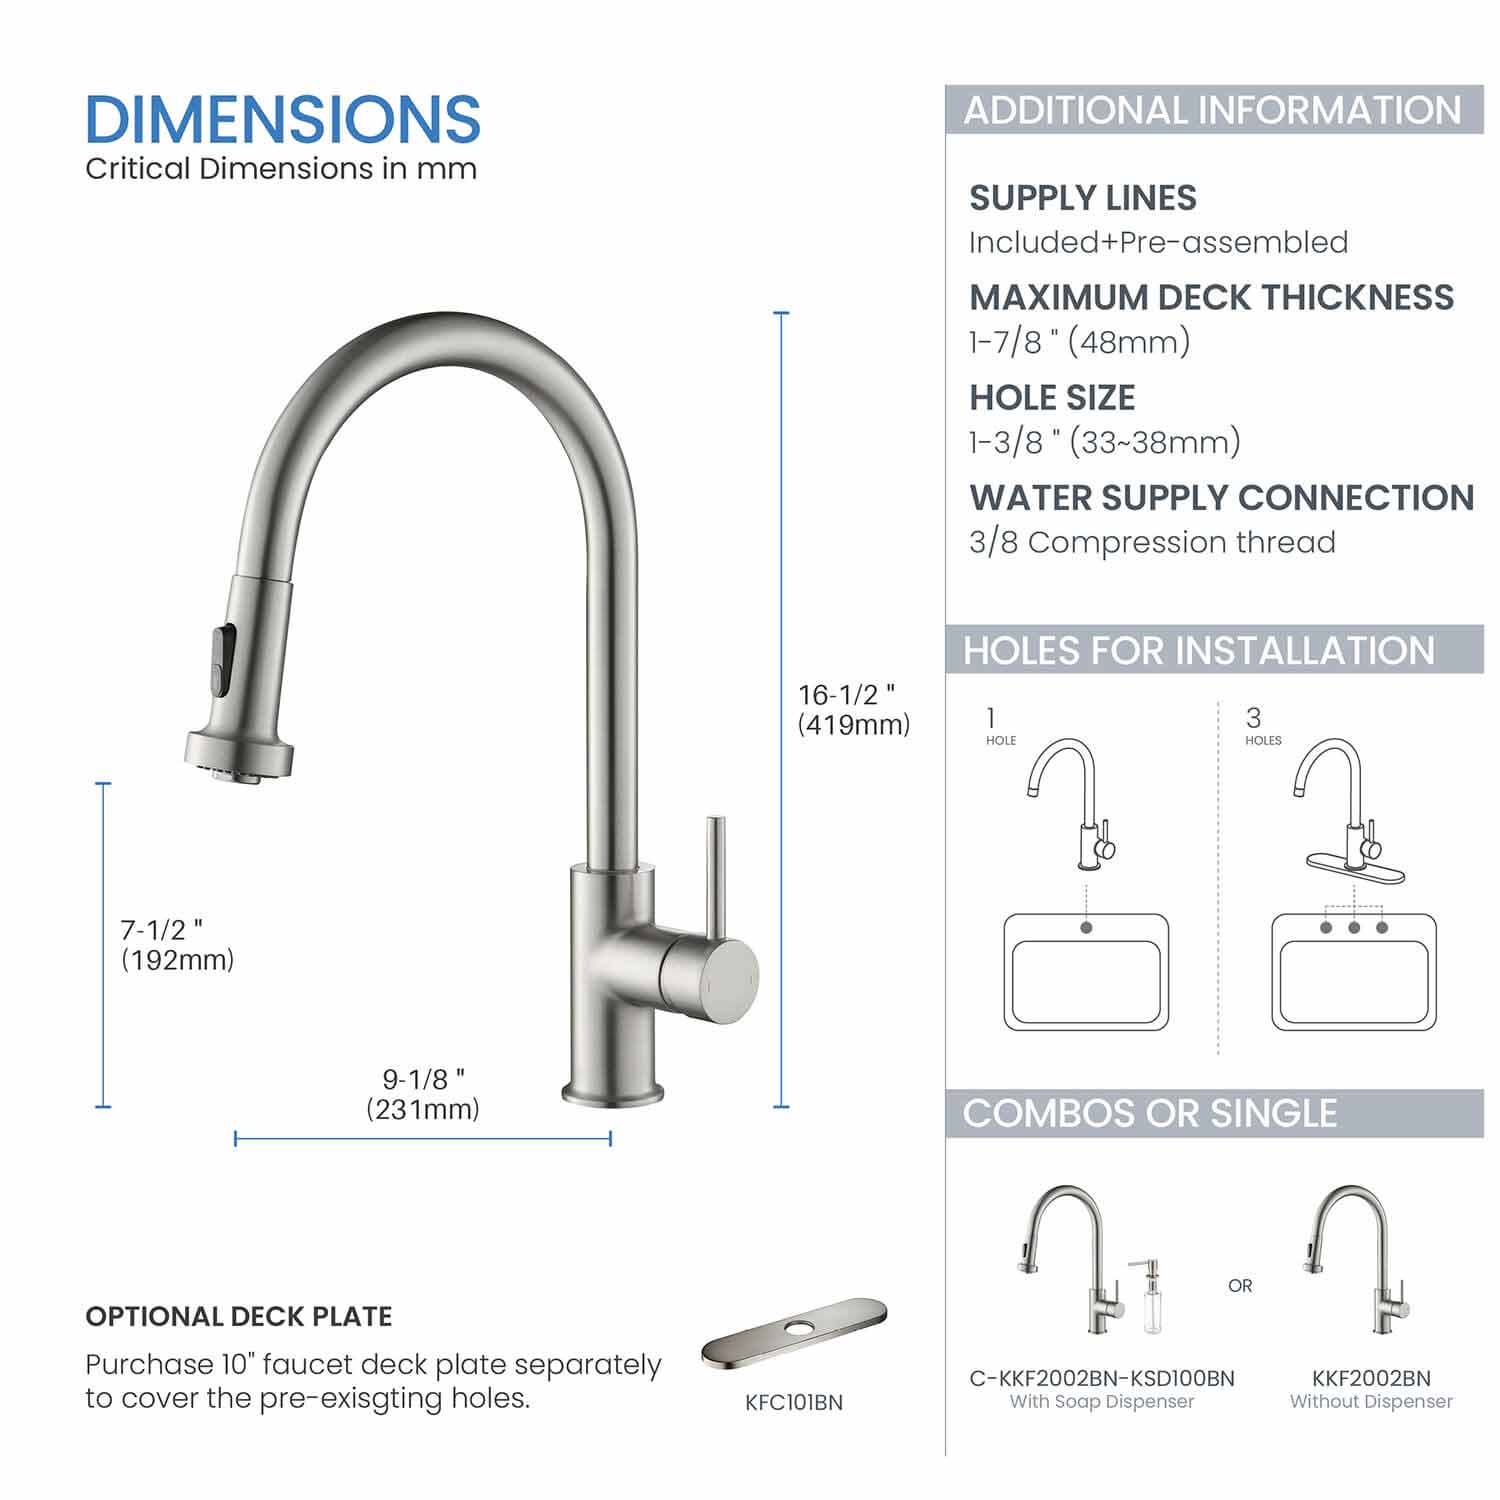 Kibi Casa Single Handle High Arc Pull Down Kitchen Faucet in Brushed Nickel Finish